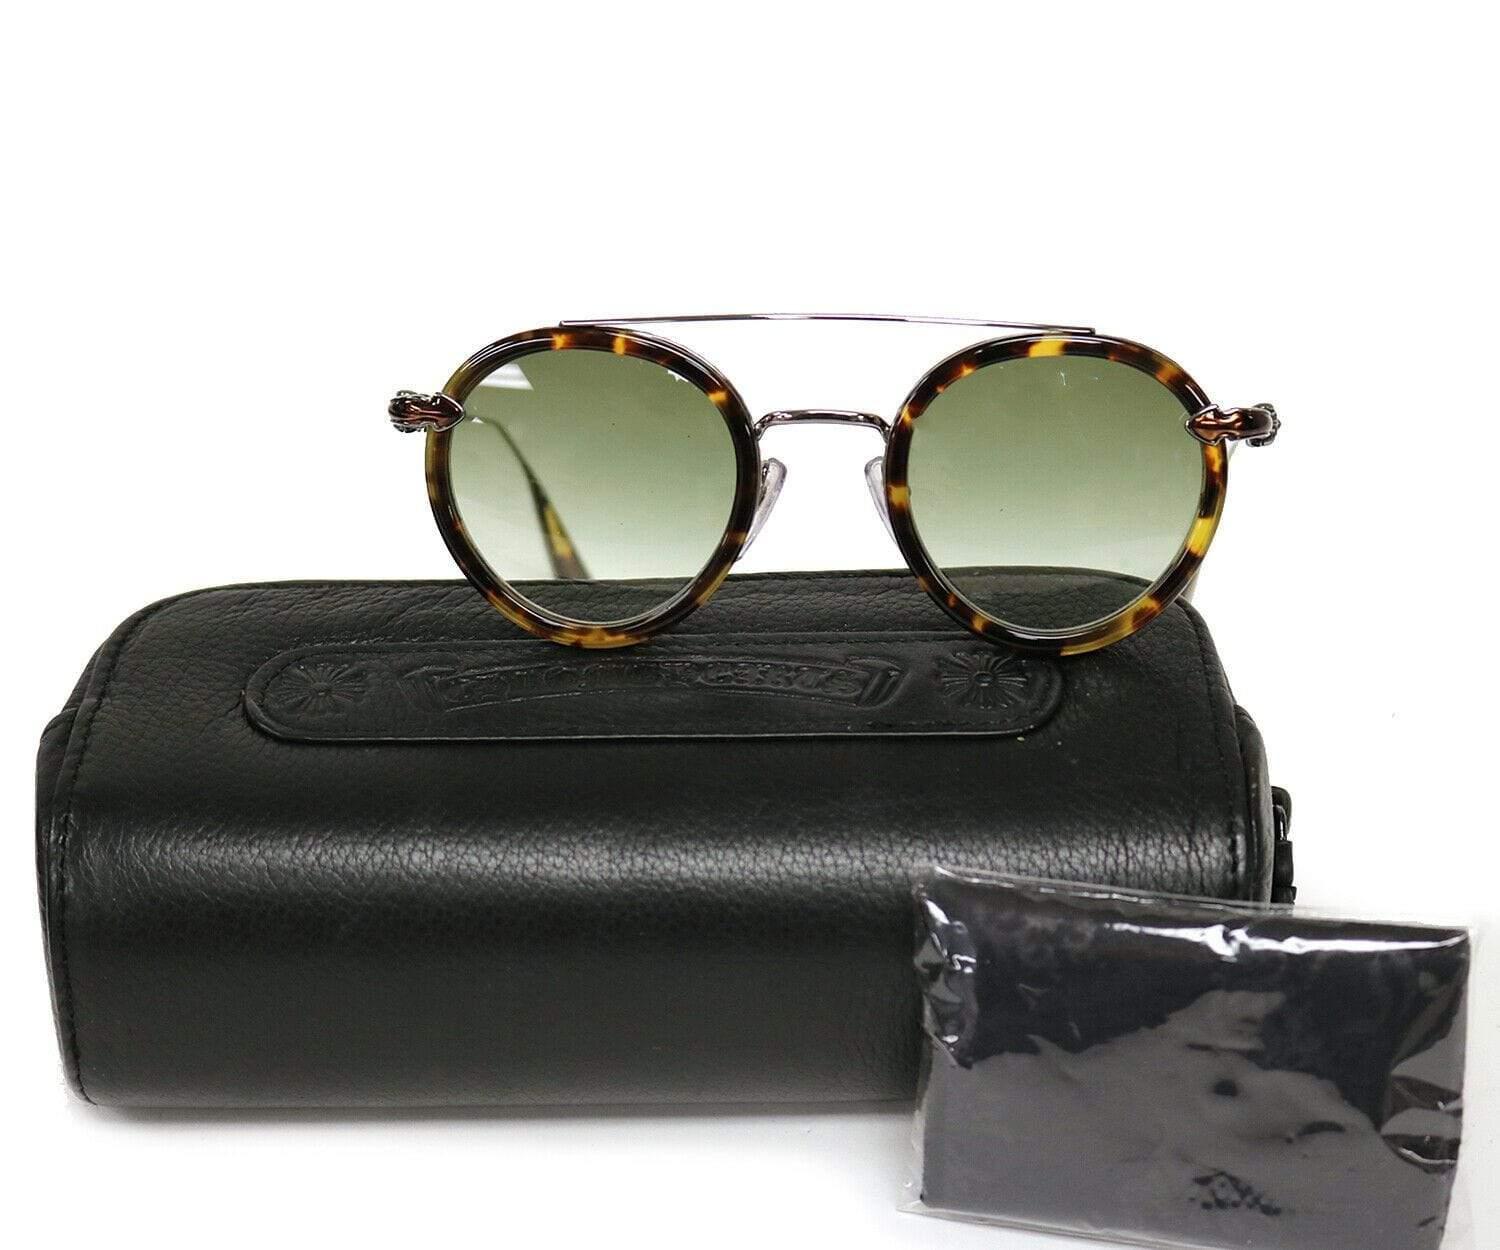 Chrome Hearts Bo’Jimr II Tortoise Sunglasses W/ Case

Chrome Hearts Bo’Jimr II Sunglasses
Tortoise Color Frame
Brown Tinted Polarized Lens
Silver Hardware
Frame Width: 2.0”
Frame Height: 2.0”
Stamped Chrome Hearts, Bo’Jimr, Frame Made in